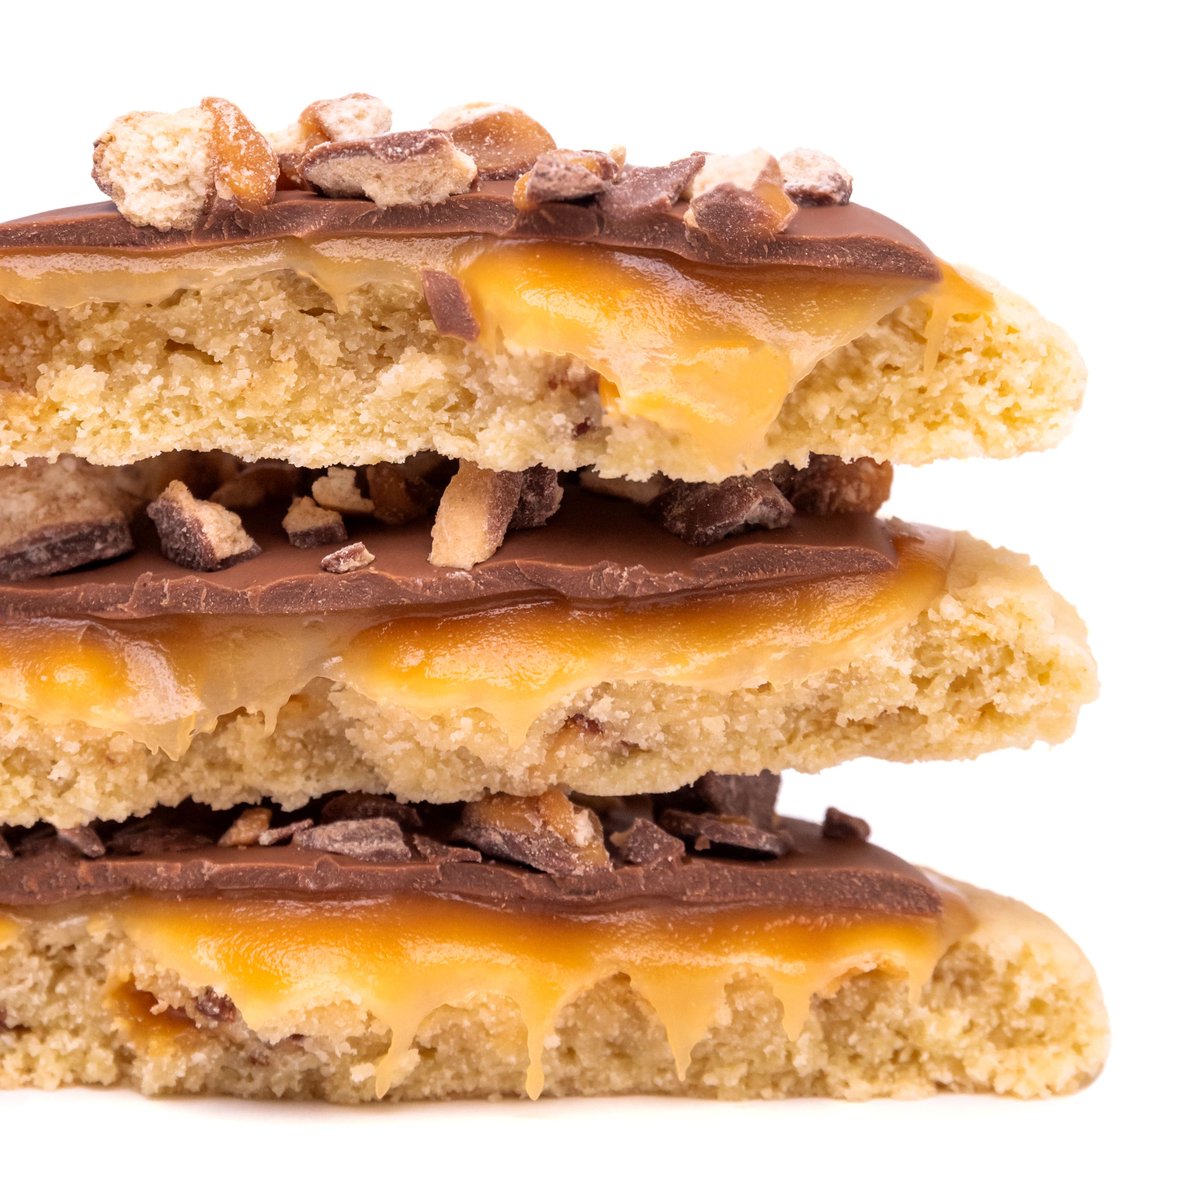 It’s back! The Caramel Shortbread featuring Twix cookie is on the @CrumblCookies menu this week! Get yours for a limited time only from 8/14-8/19 at all Crumbl locations.